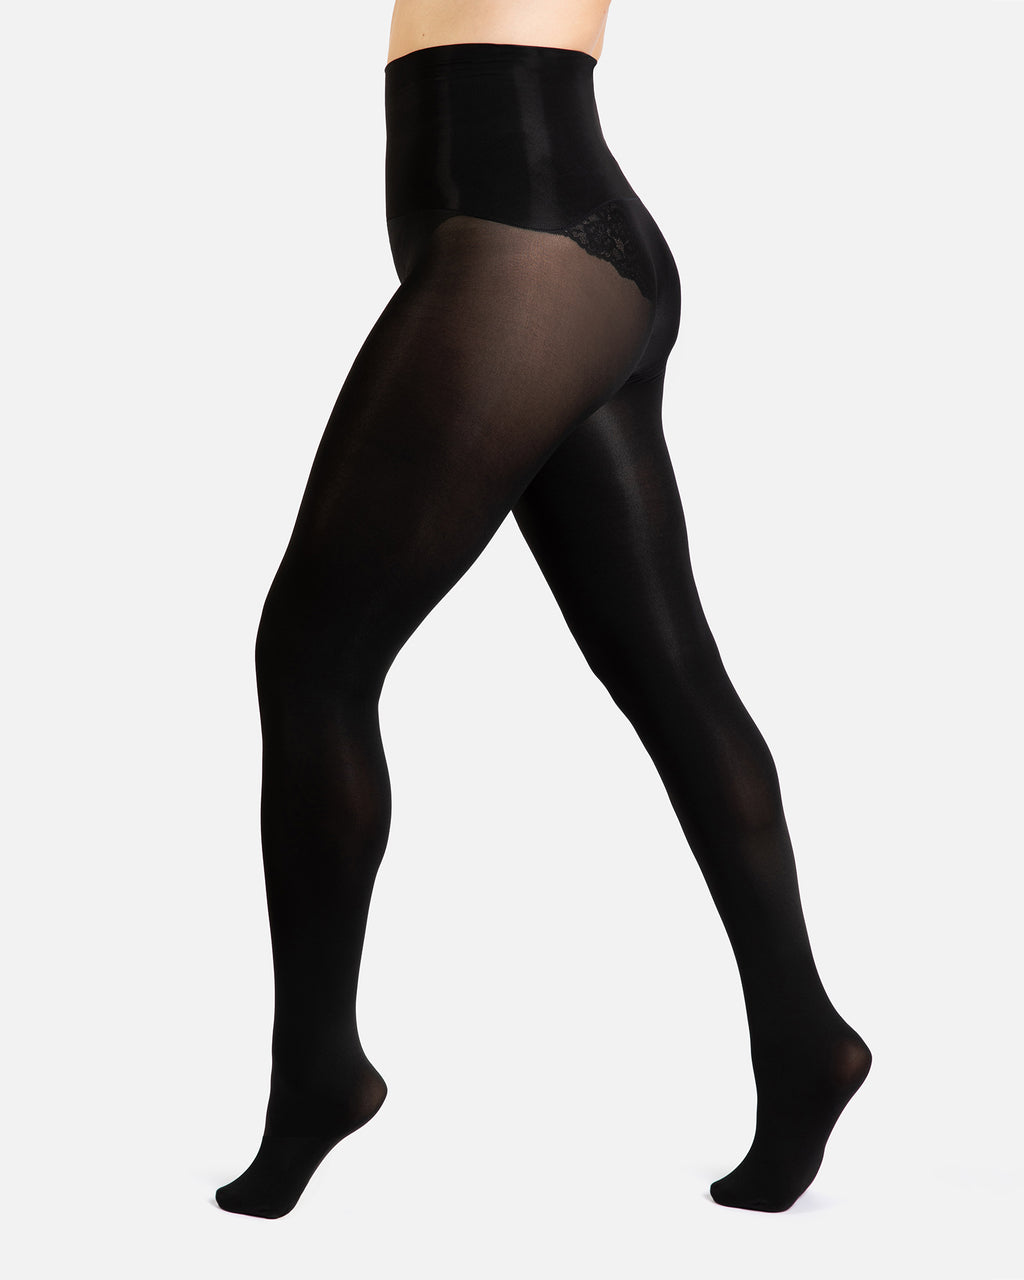 Buy Black Seamless 60 Denier Tights One Pack from the Next UK